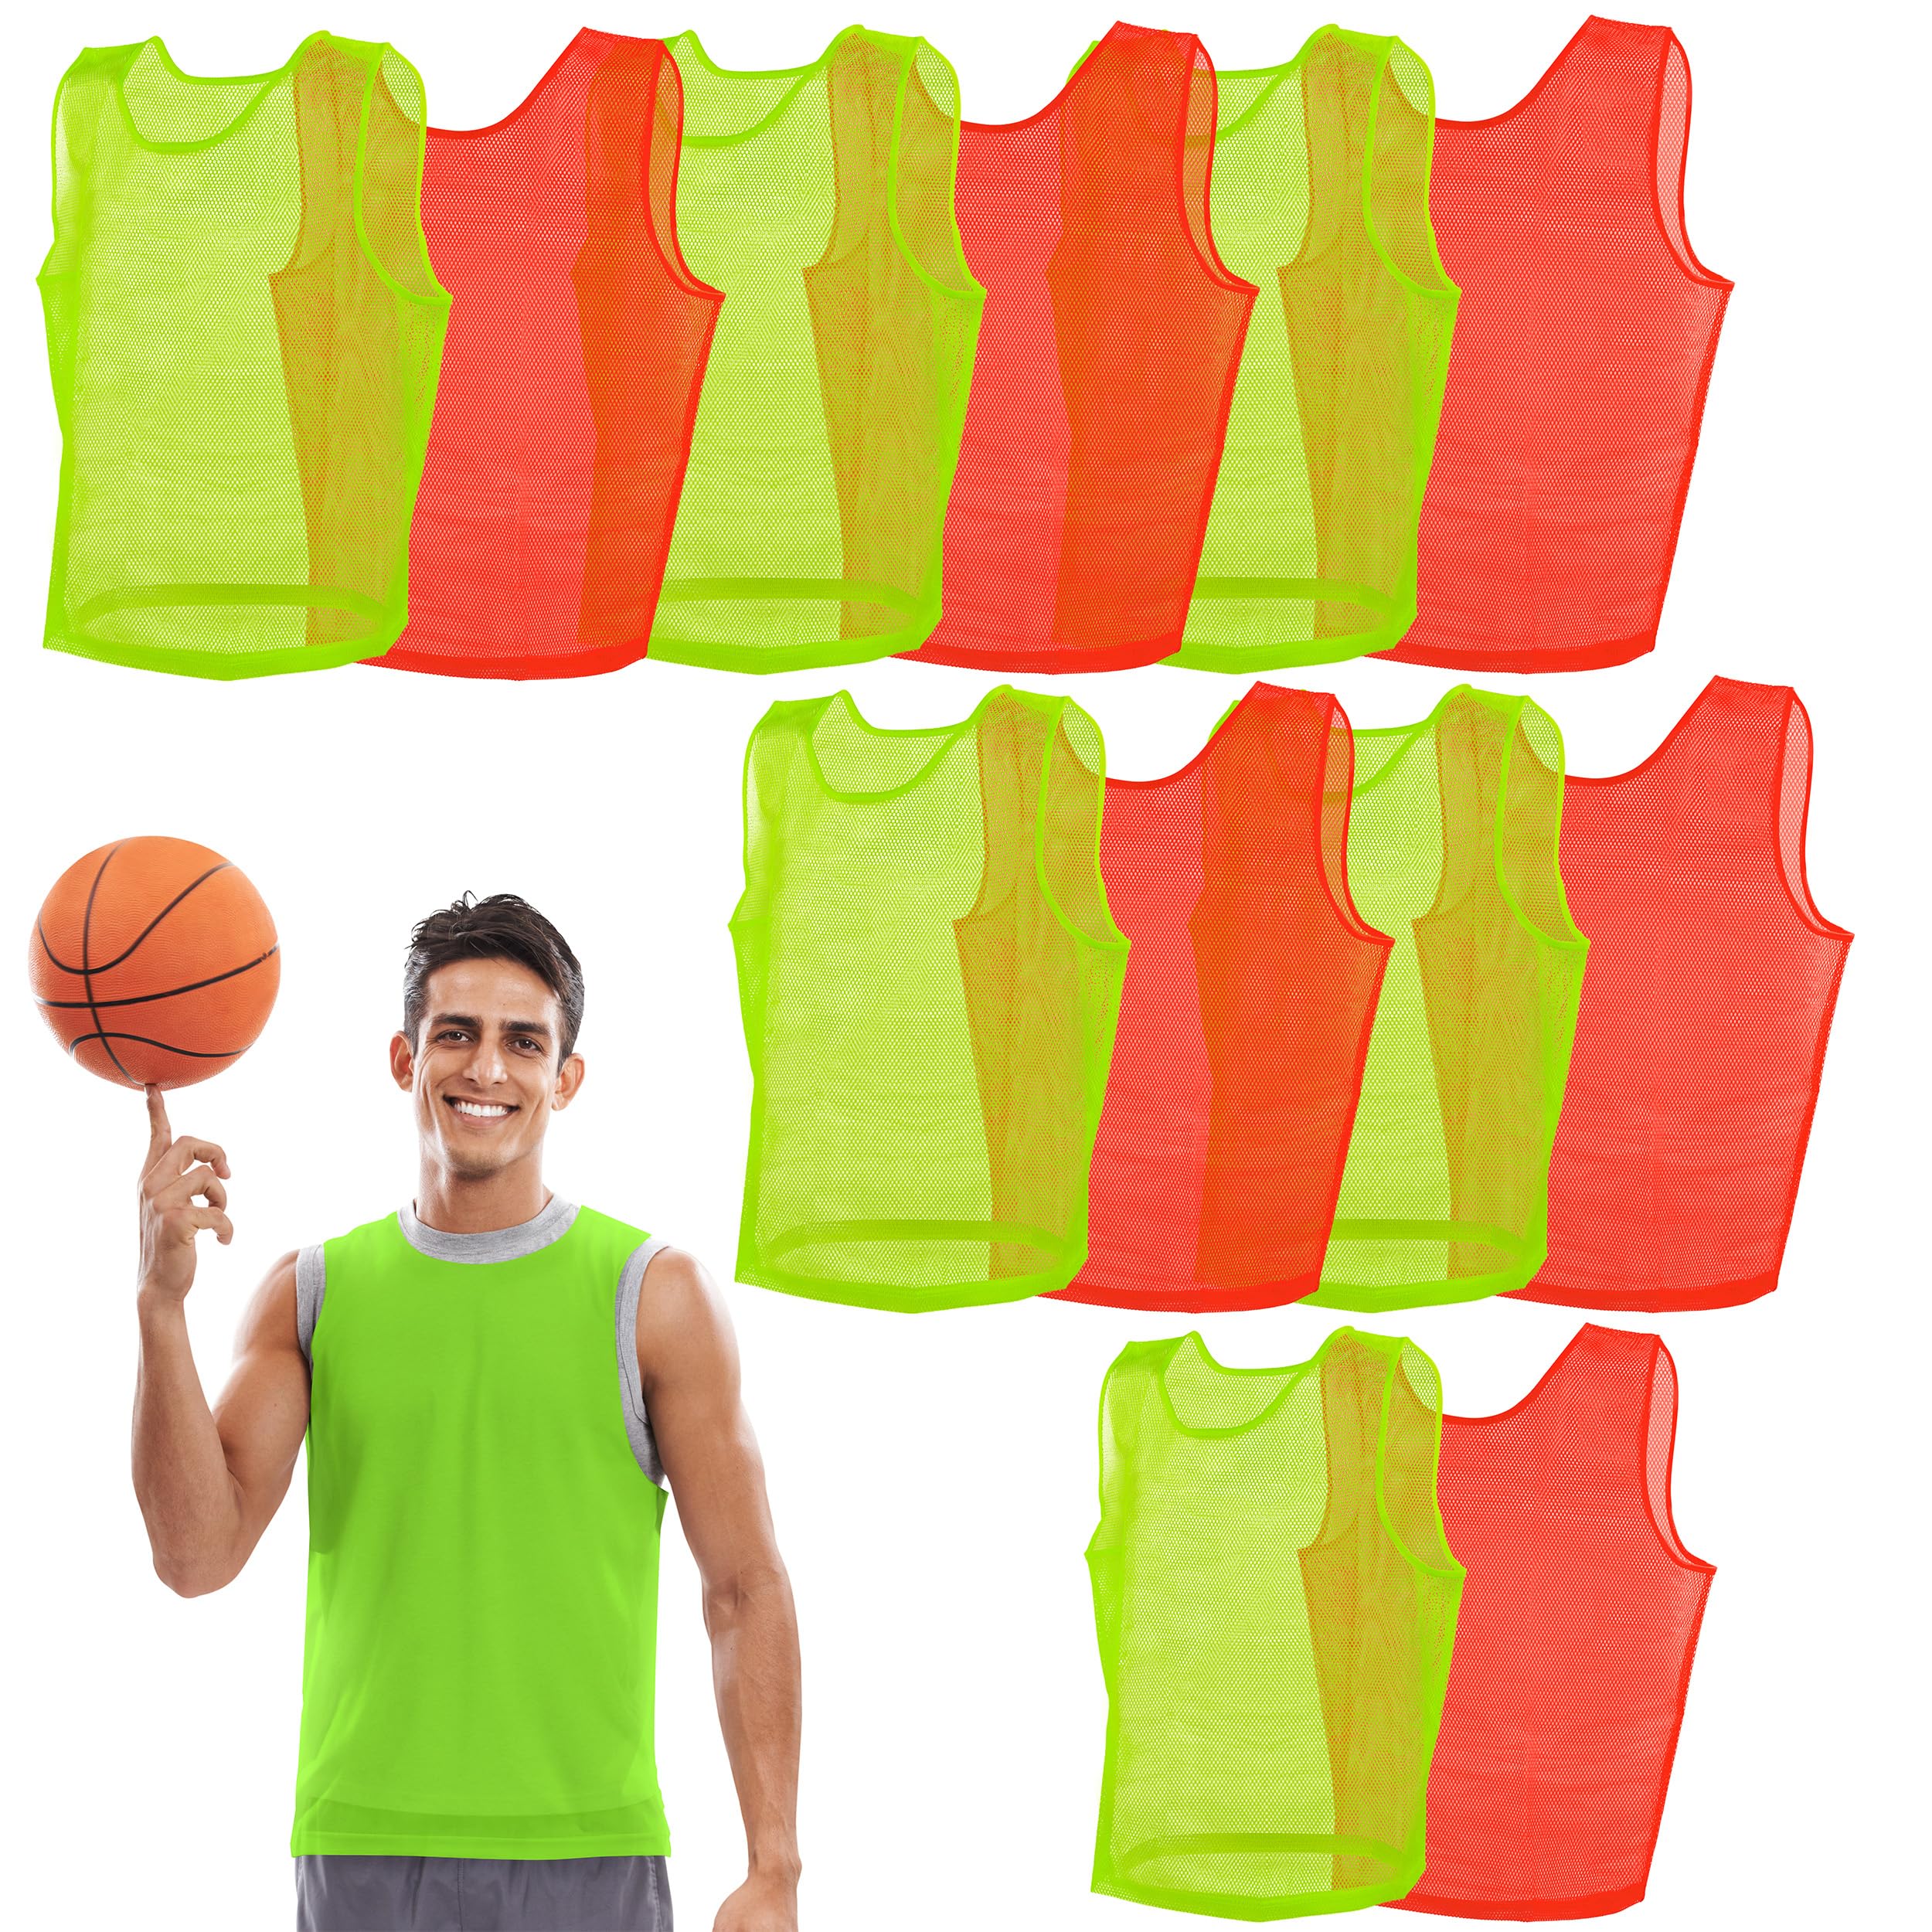 Get Out! Scrimmage Vest Pinnies 12pk in Red and Blue – Youth, Teens and Adult Sizes – Nylon Mesh Jerseys for Any Sport